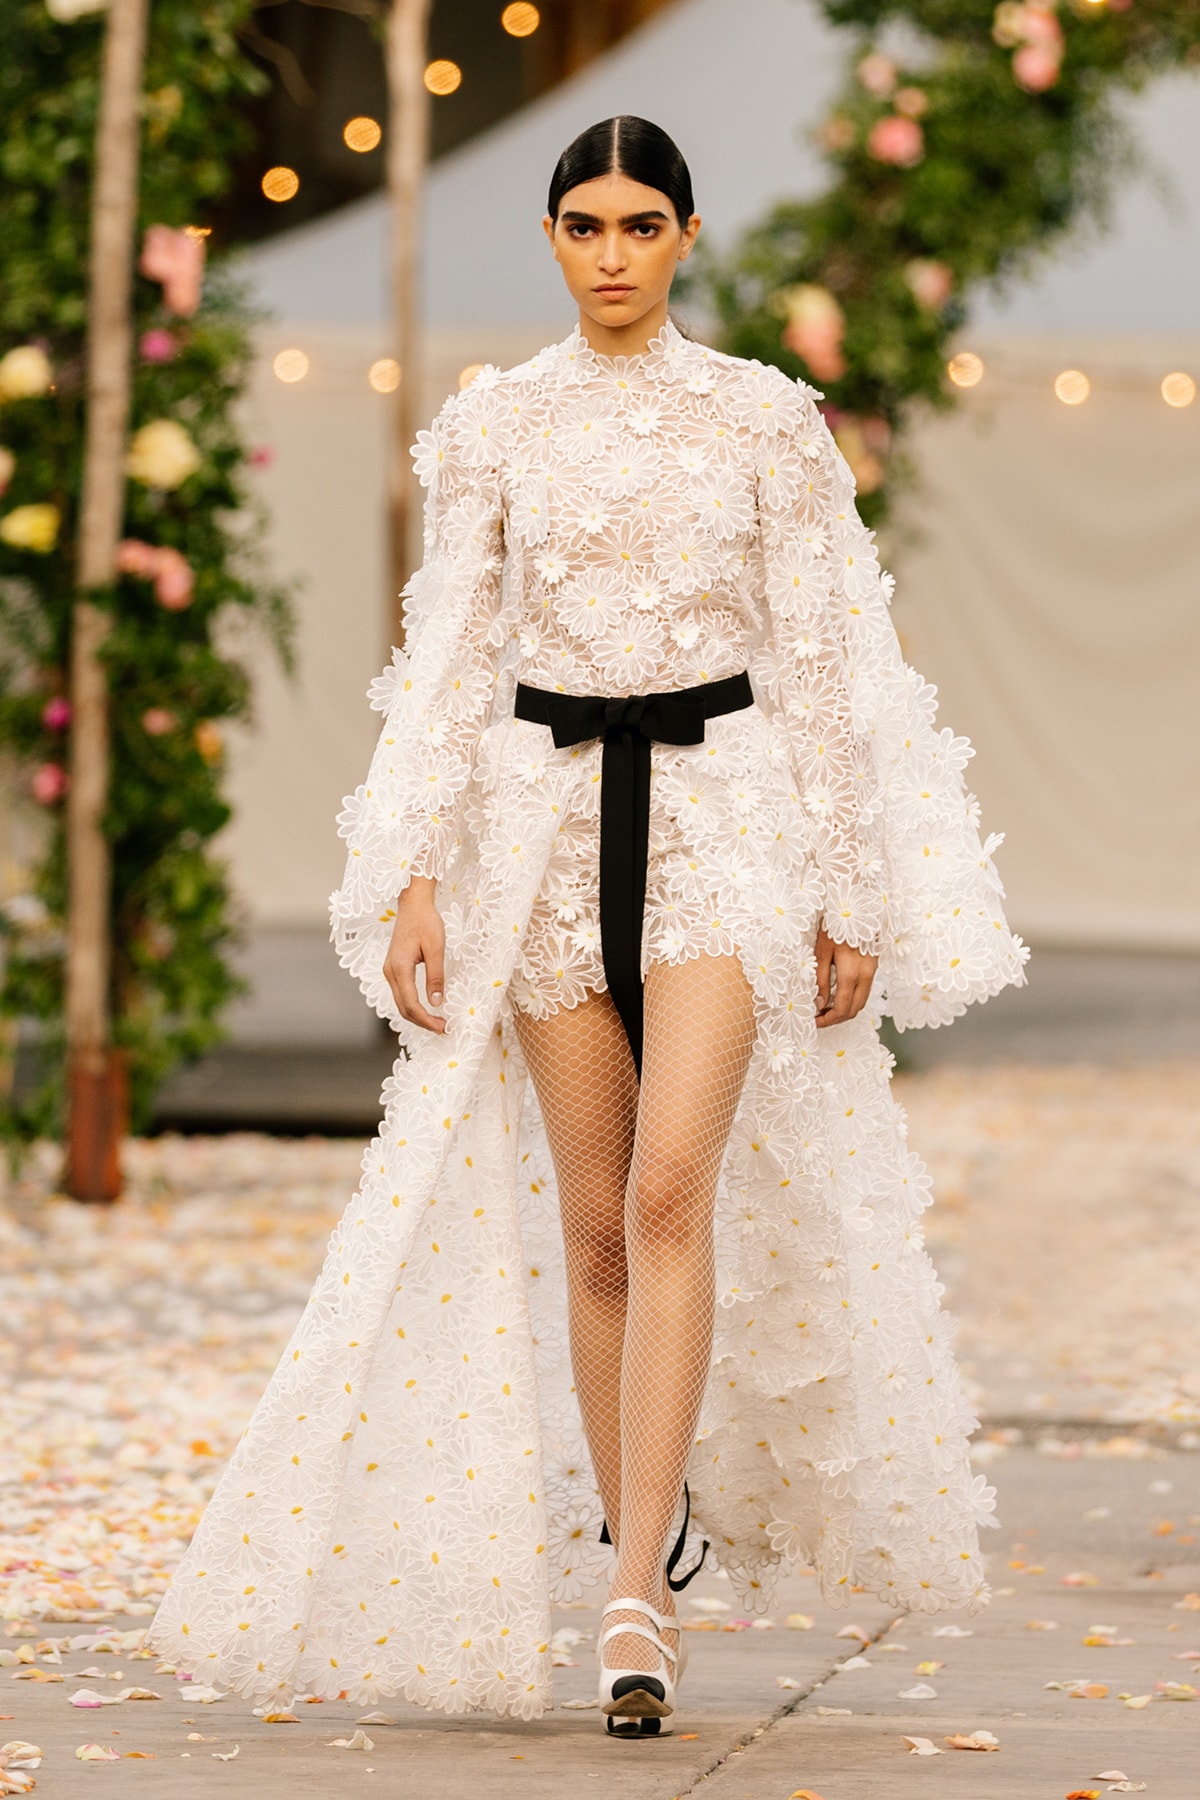 Chanel's SS21 Couture Collection Celebrates Family